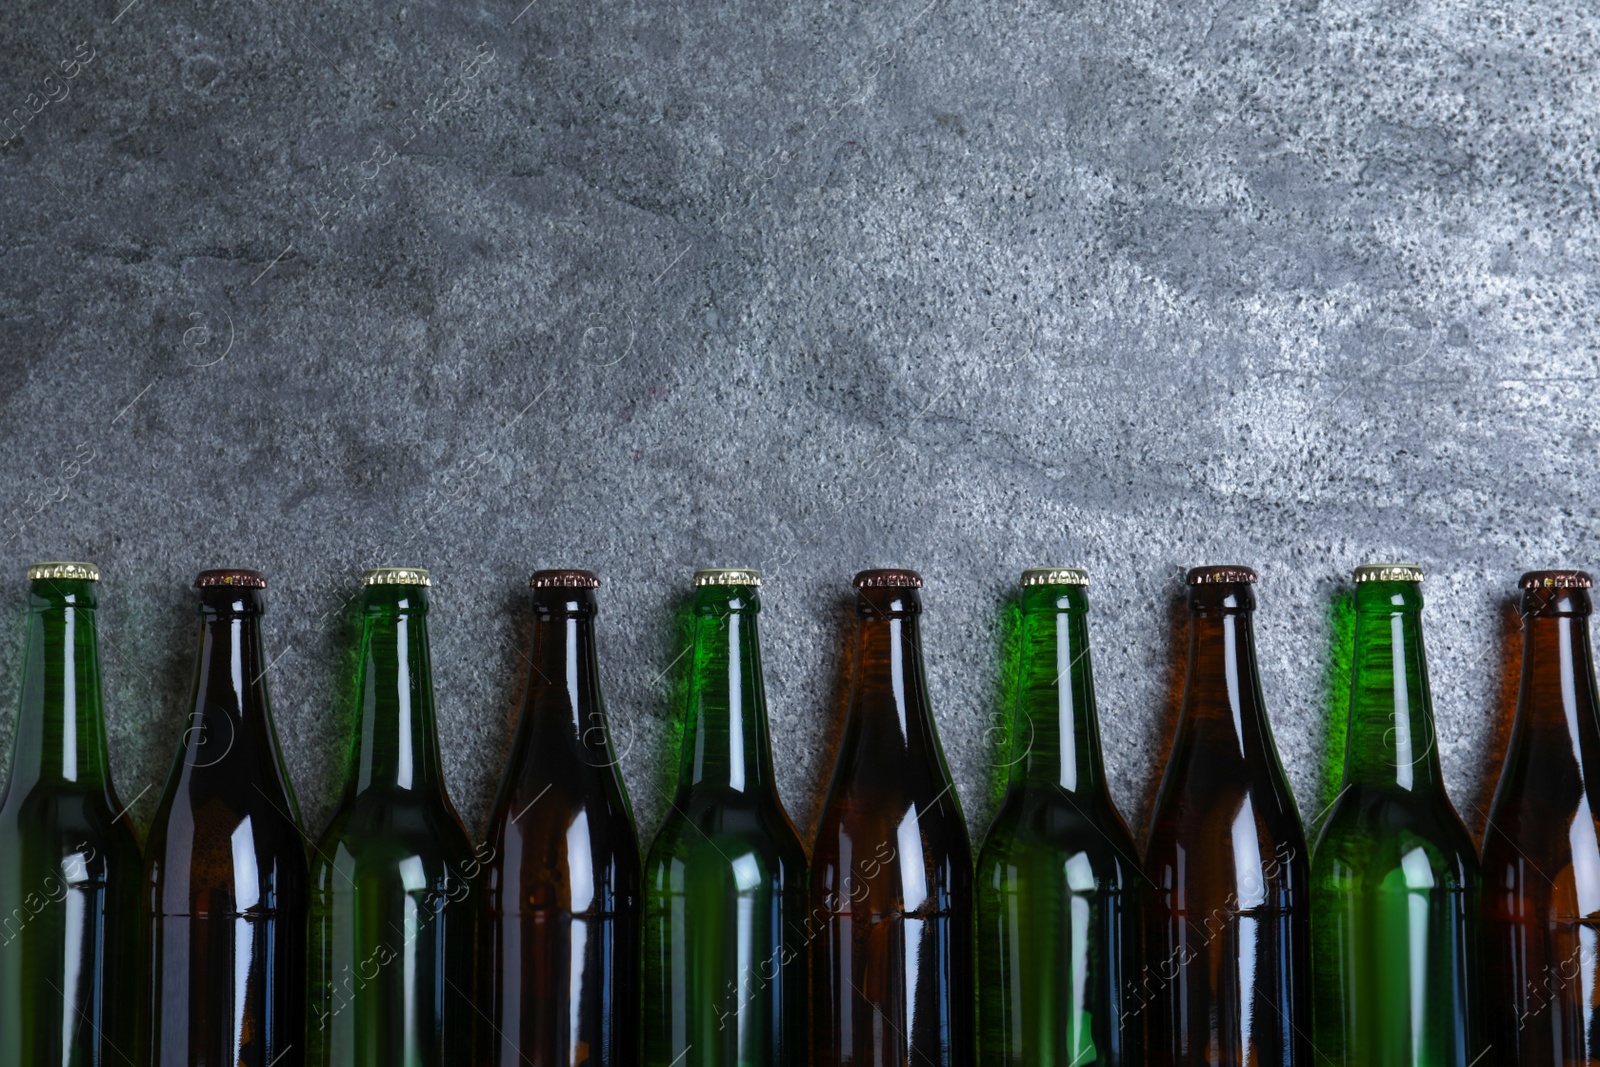 Photo of Bottles with beer on grey table, flat lay. Space for text